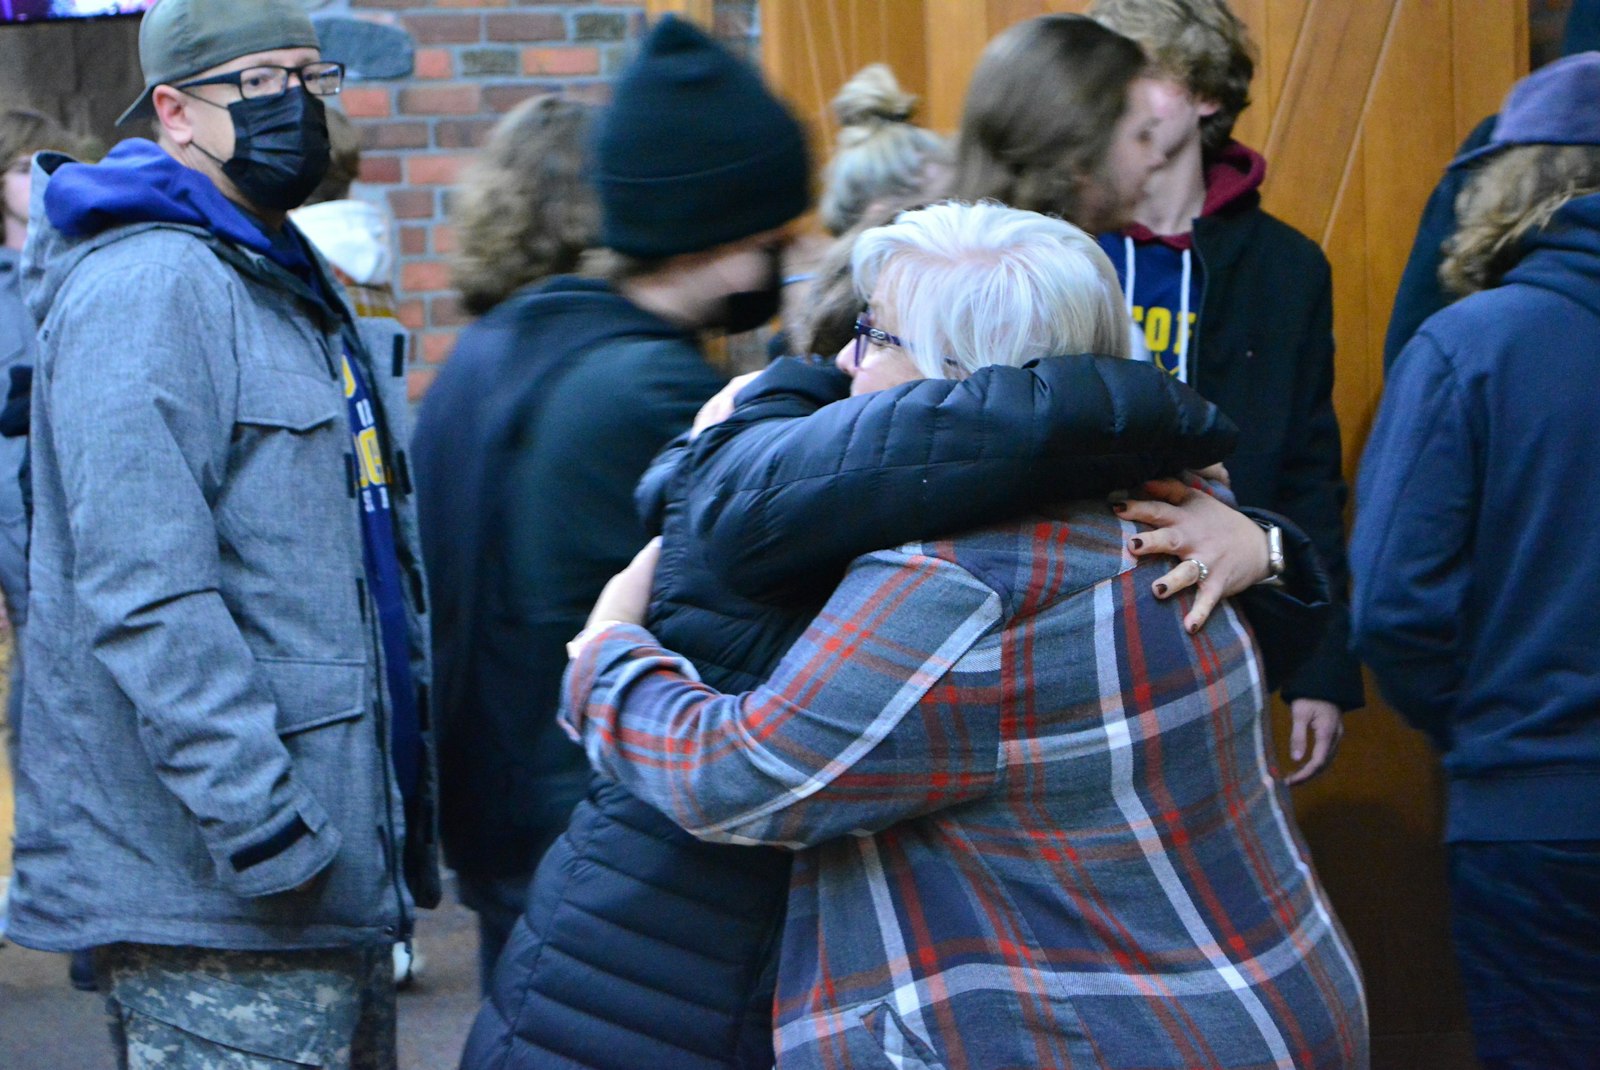 People hug one another in the vestibule of St. Joseph Parish in Lake Orion during a Mass on Nov. 30 in the aftermath of a school shooting at nearby Oxford High School. With nearly 1,800 students enrolled, the Oakland County school is one of the largest public high schools in the state.